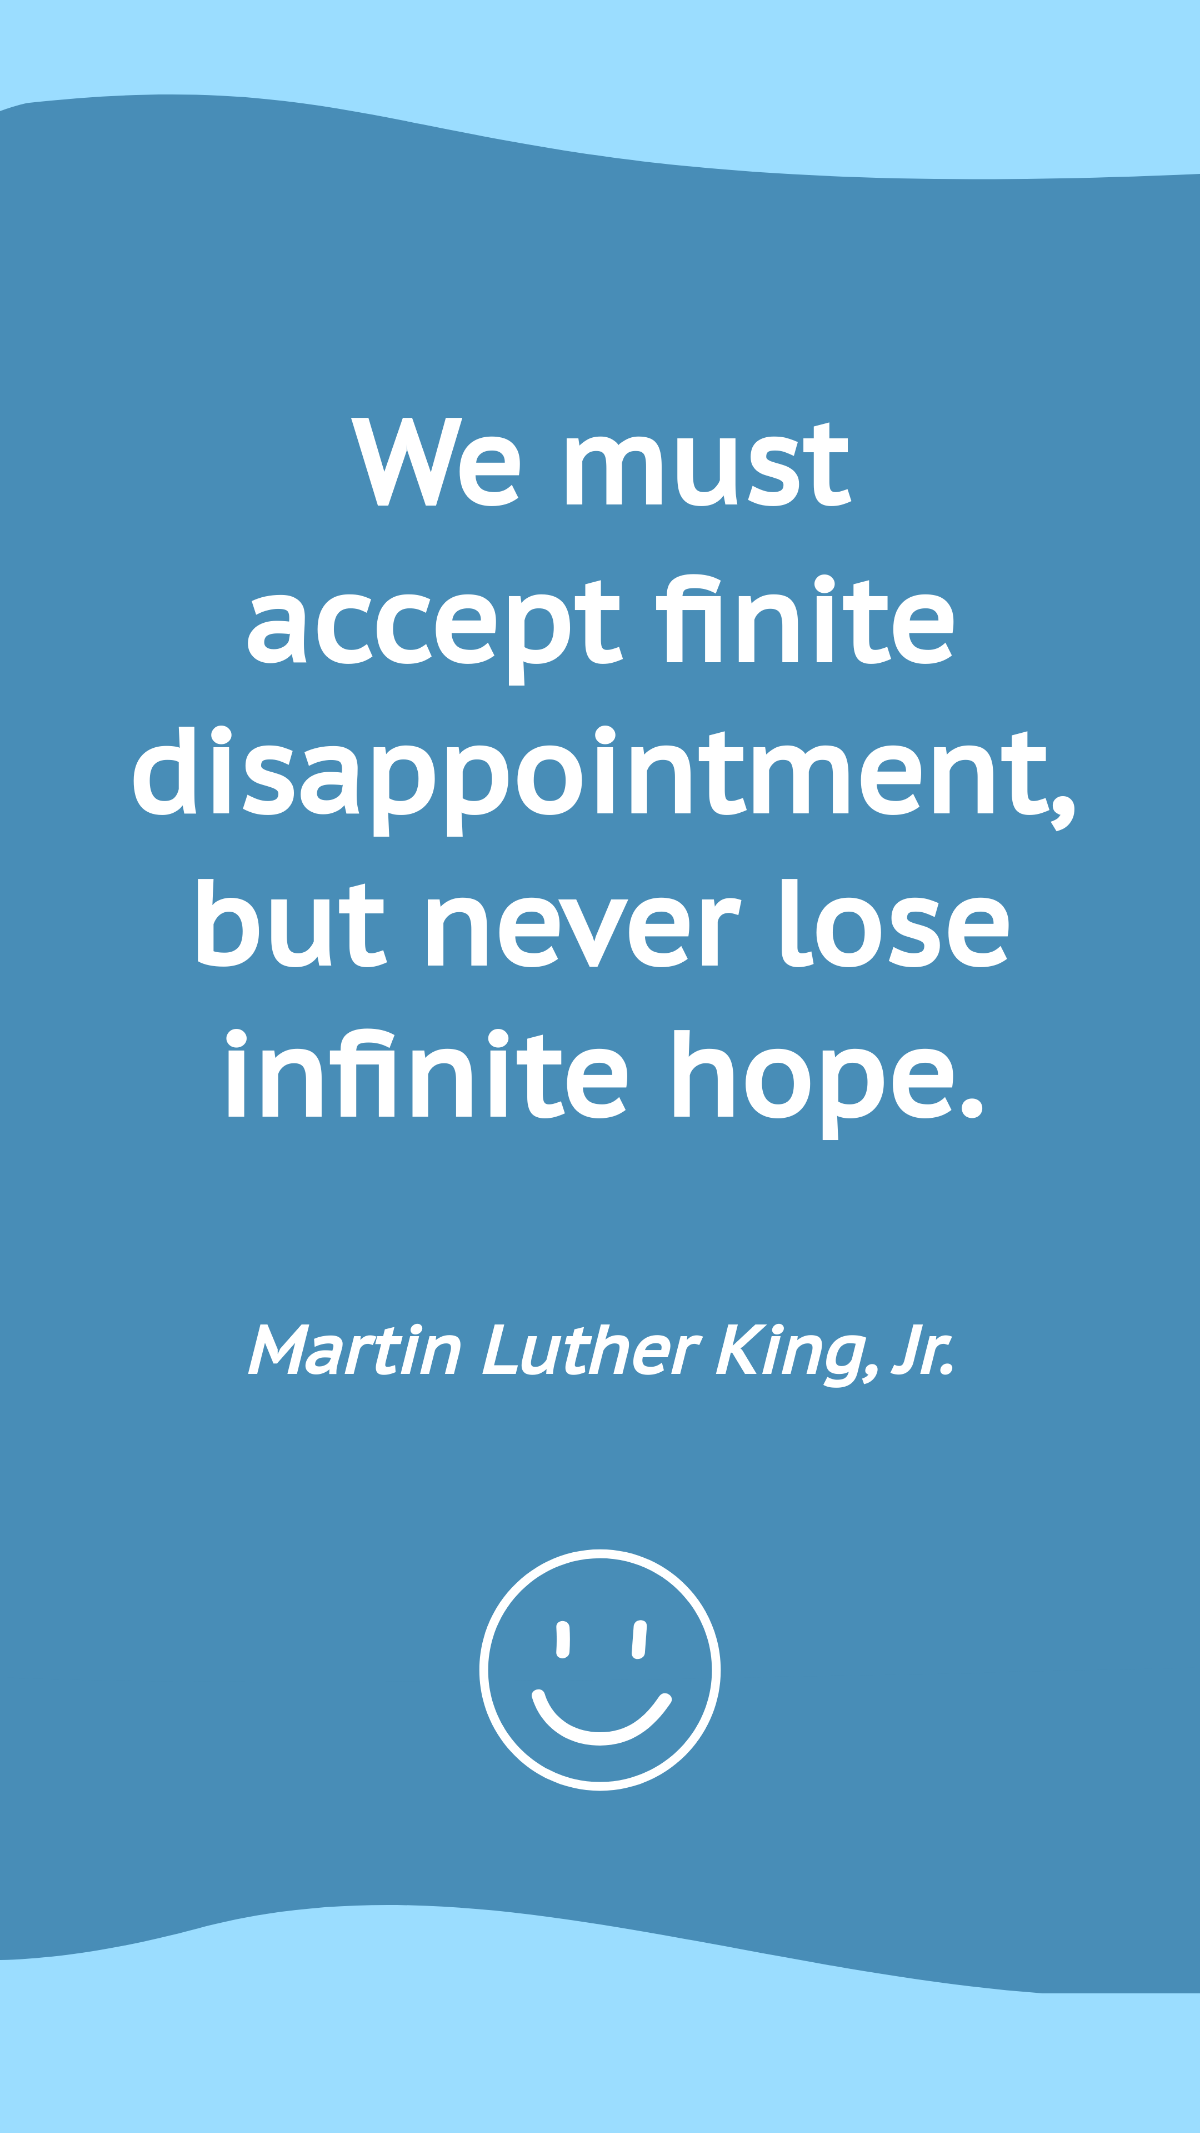 Martin Luther King, Jr. - We must accept finite disappointment, but never lose infinite hope. Template